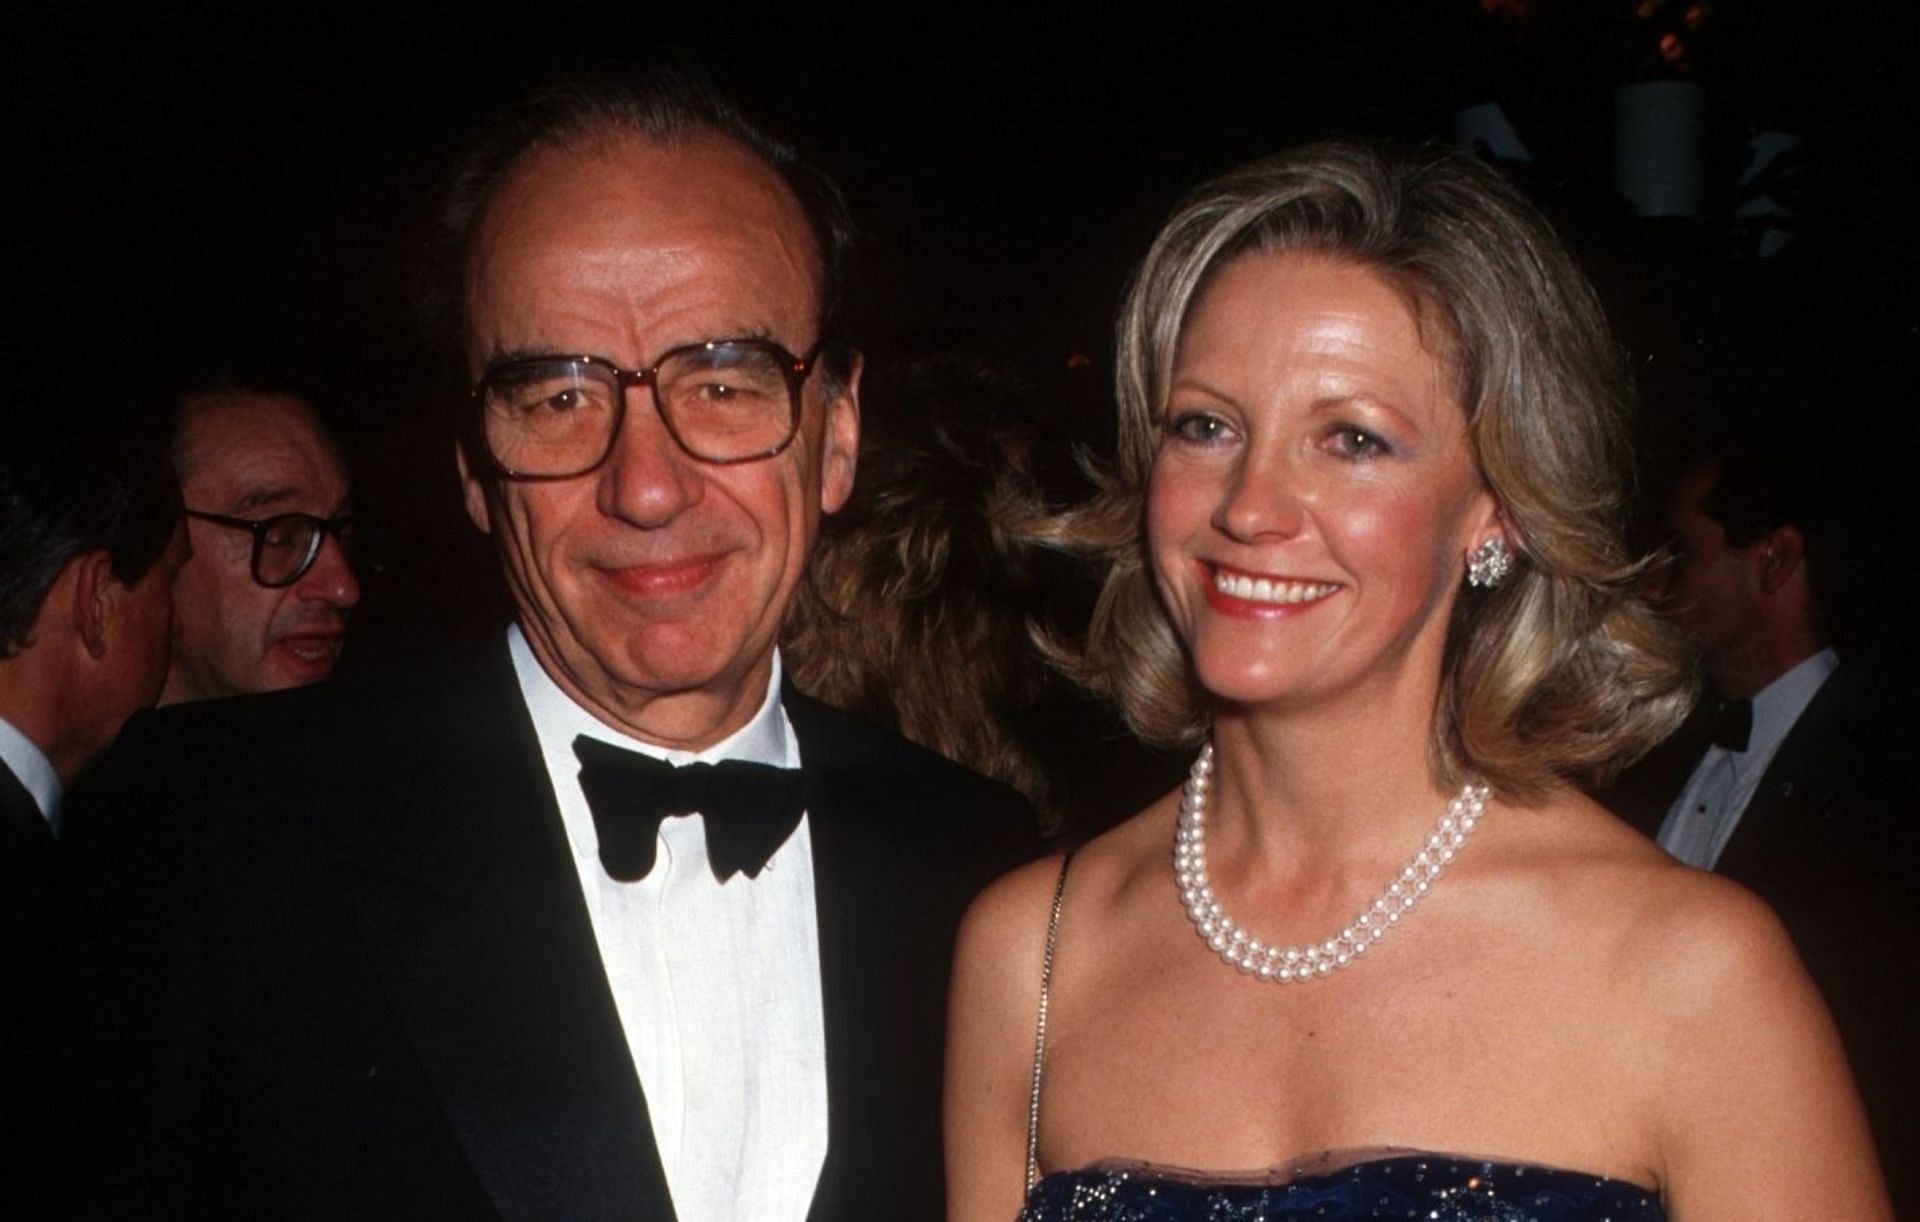 Rupert Murdoch and Anna Torv (Image via Ron Galella, Ltd./Ron Galella Collection/Getty Images)